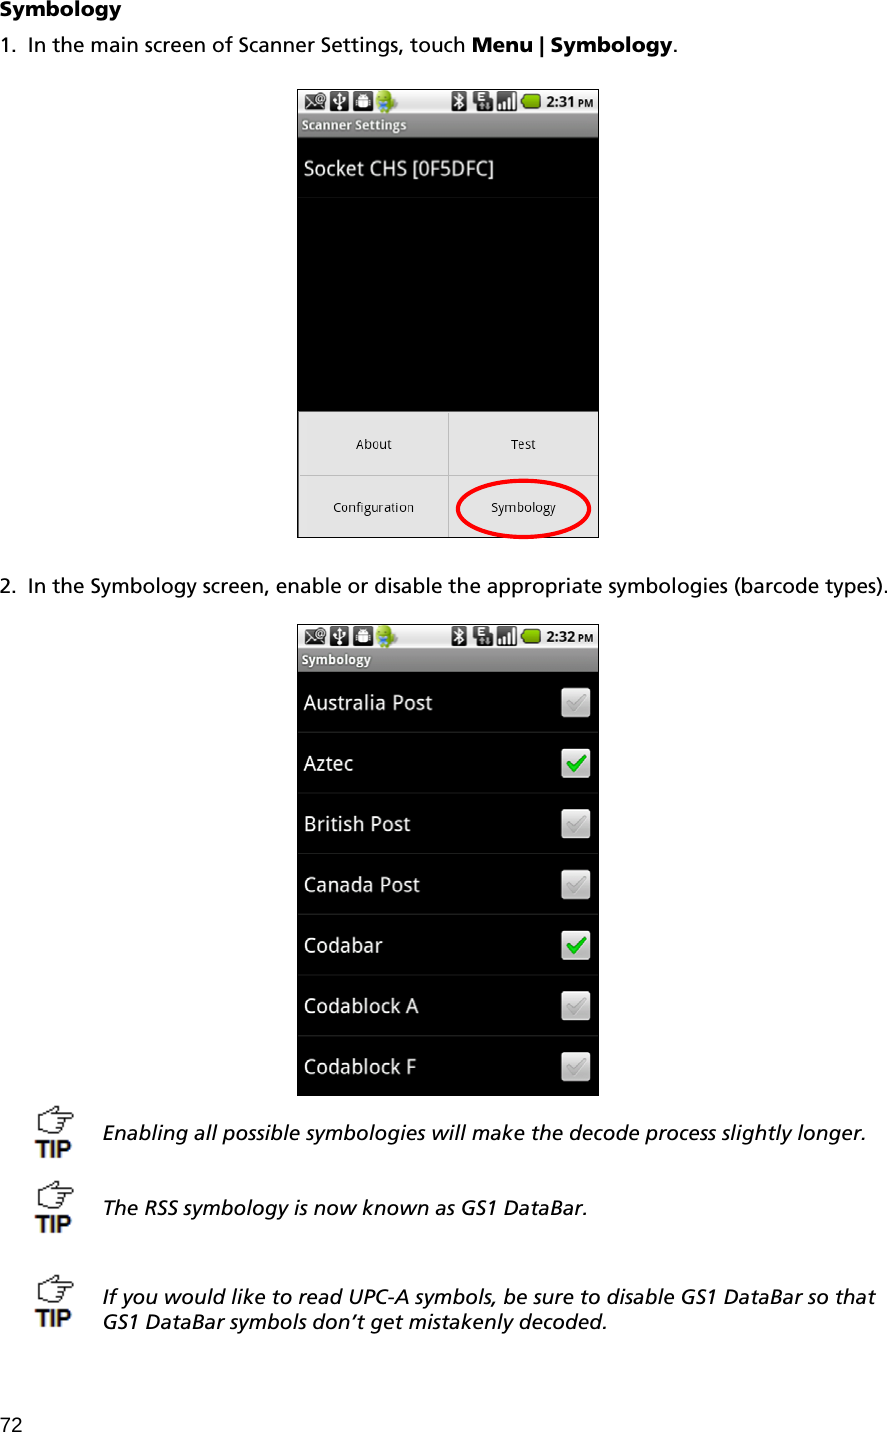 72 Symbology  1. In the main screen of Scanner Settings, touch Menu | Symbology.        2. In the Symbology screen, enable or disable the appropriate symbologies (barcode types).    Enabling all possible symbologies will make the decode process slightly longer.   The RSS symbology is now known as GS1 DataBar.    If you would like to read UPC-A symbols, be sure to disable GS1 DataBar so that GS1 DataBar symbols don’t get mistakenly decoded. 